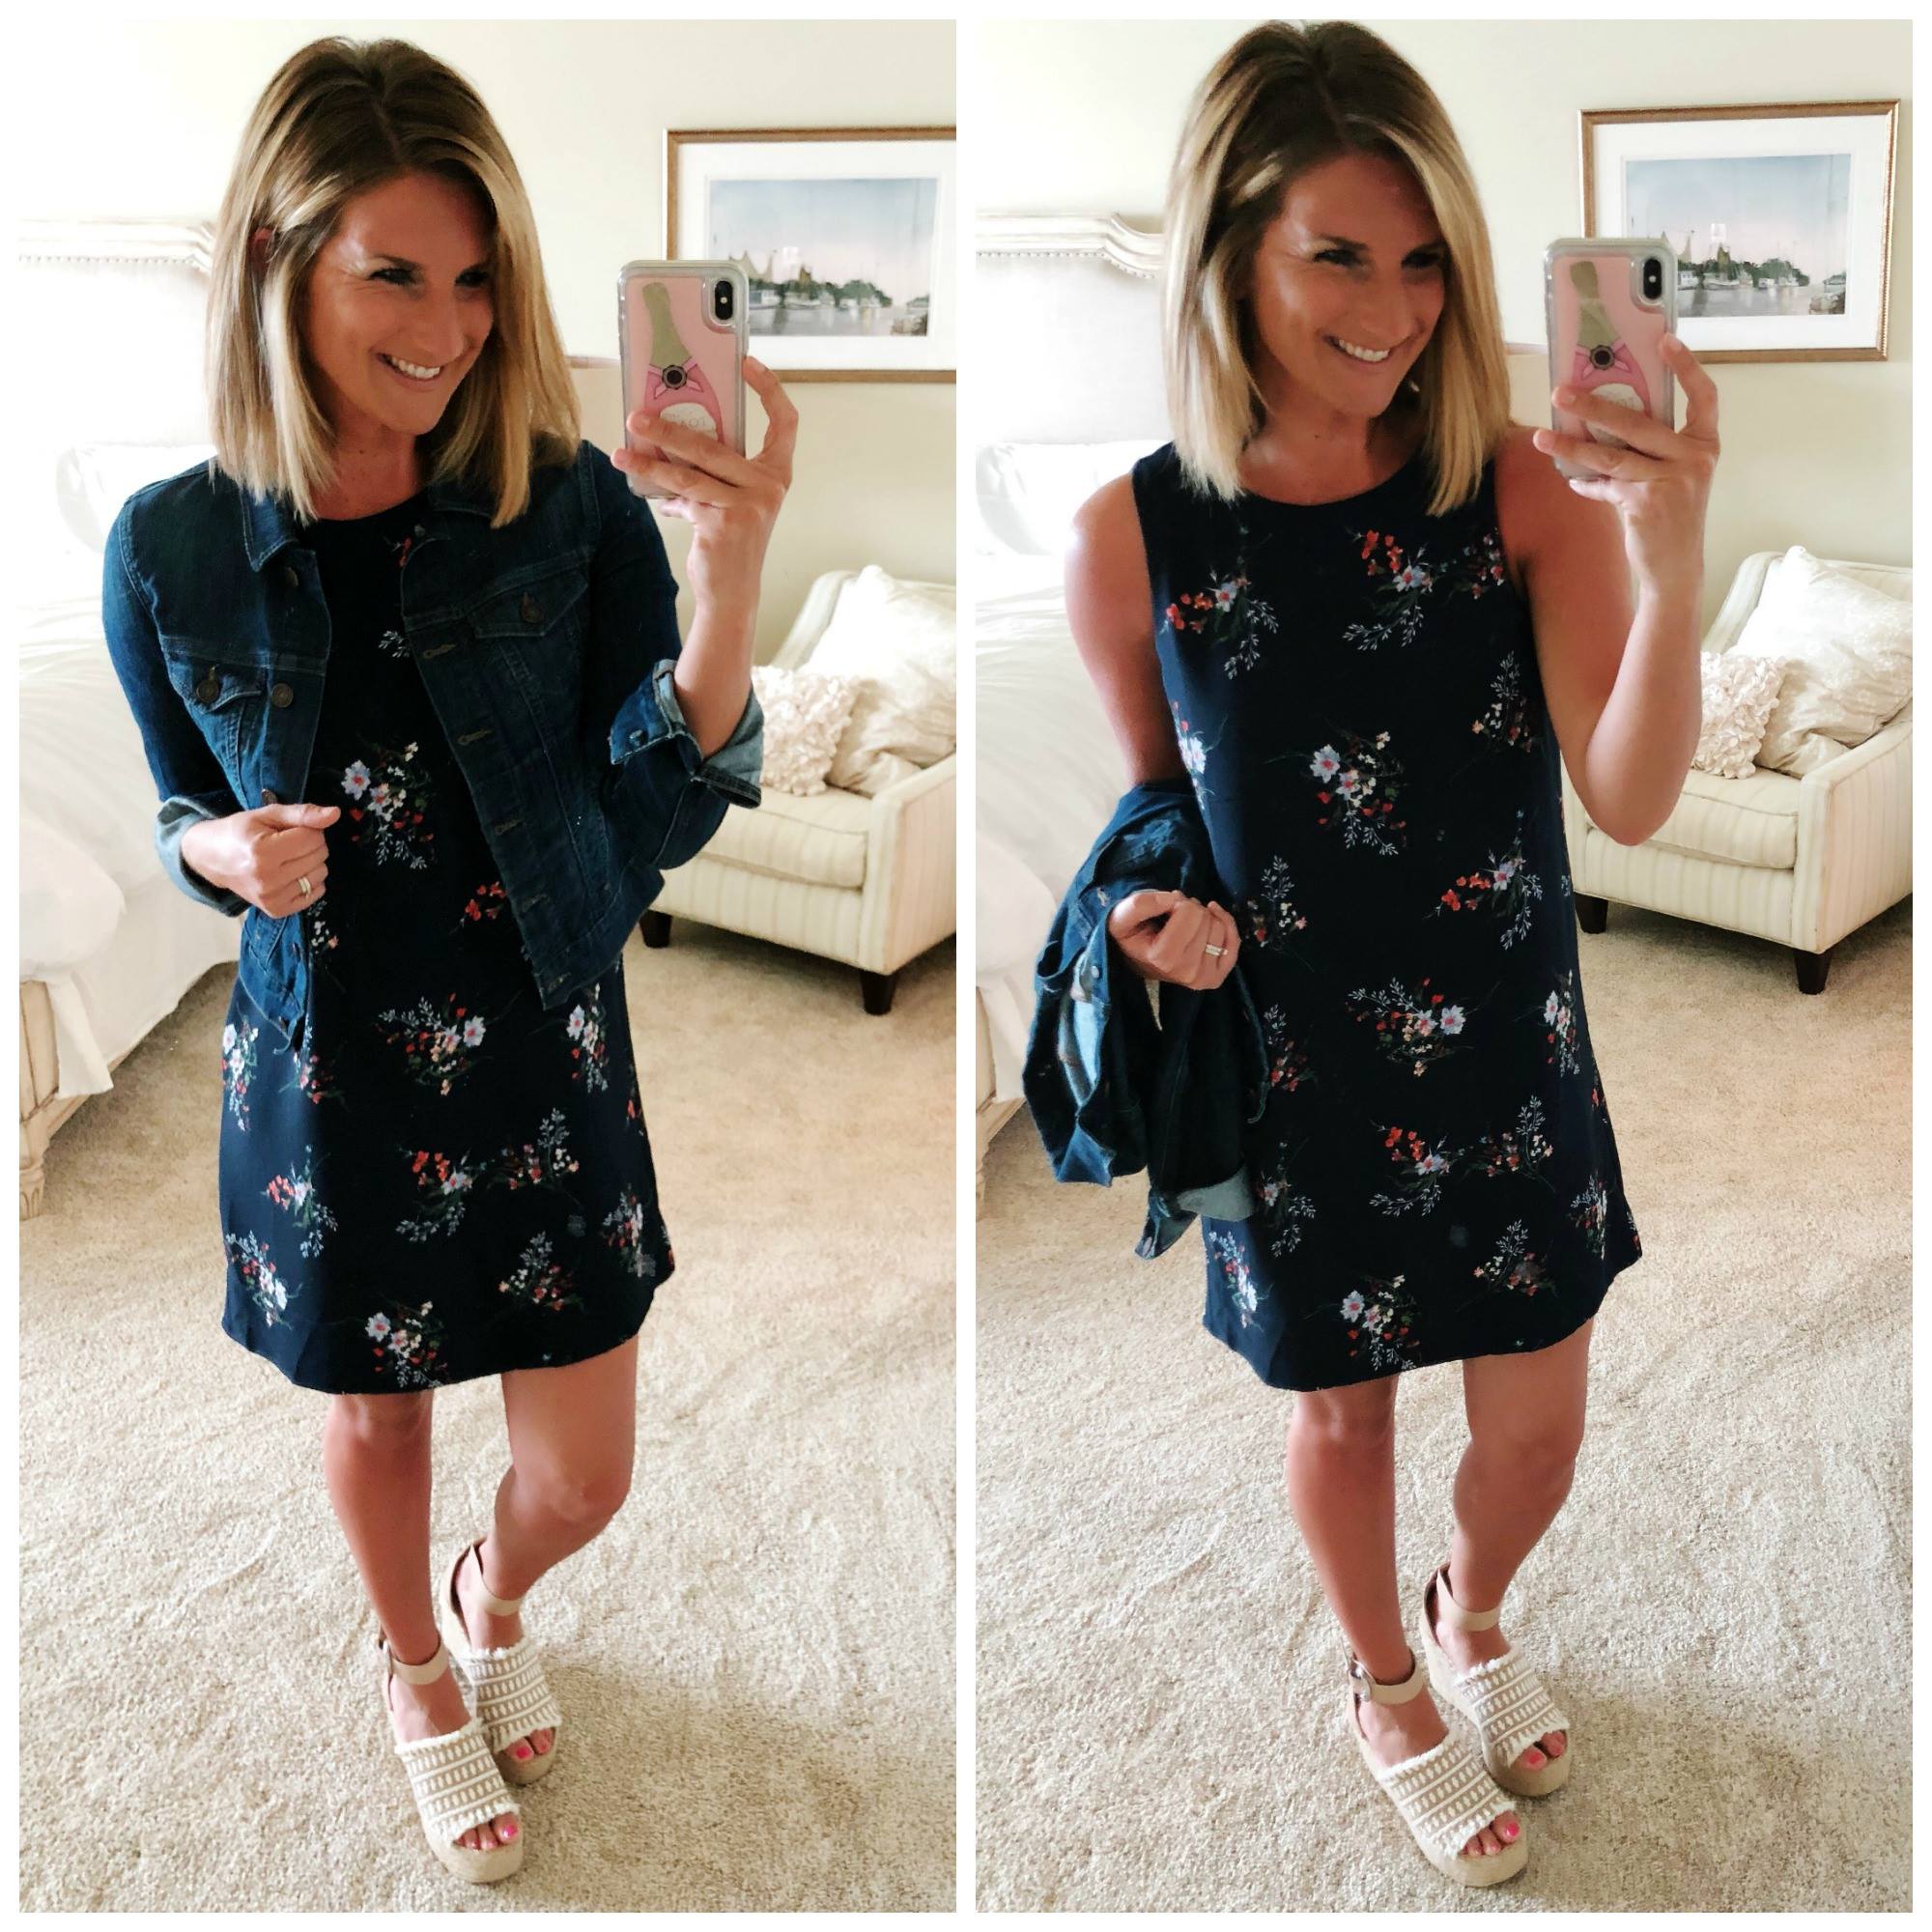 Perfect Summer Dress // Floral Shift Dress // Shift Dress + Espadrille Wedges + Jean Jacket // What to Wear on Vacation